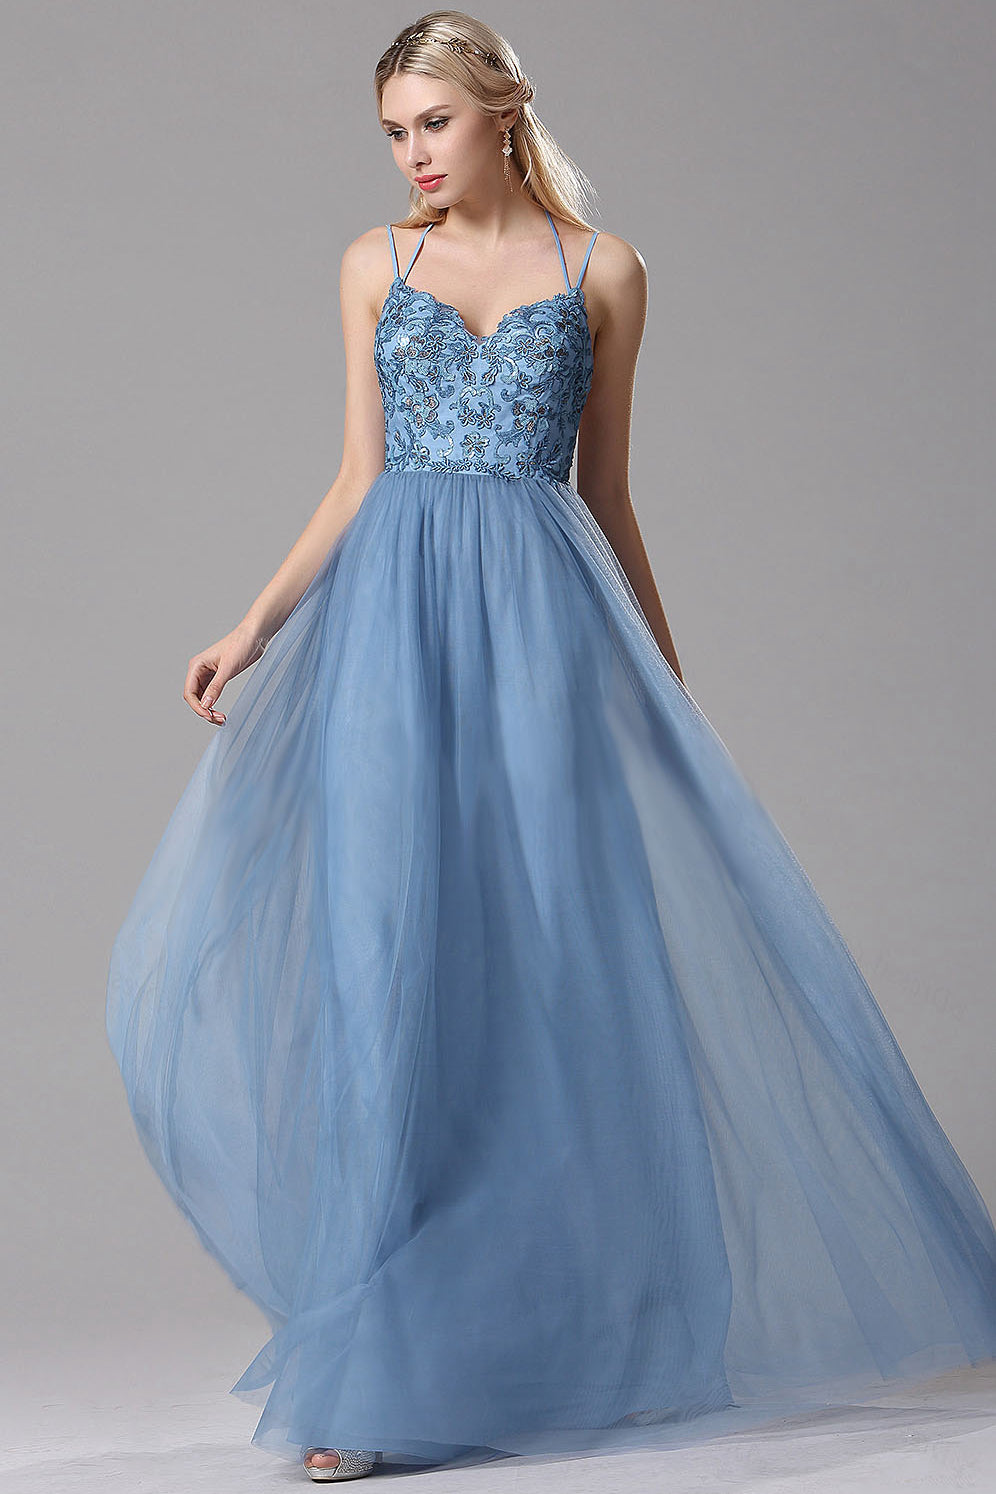 Blue Floral Tulle Prom Dress Bow-Tie Formal Dresses 21340 – vigocouture